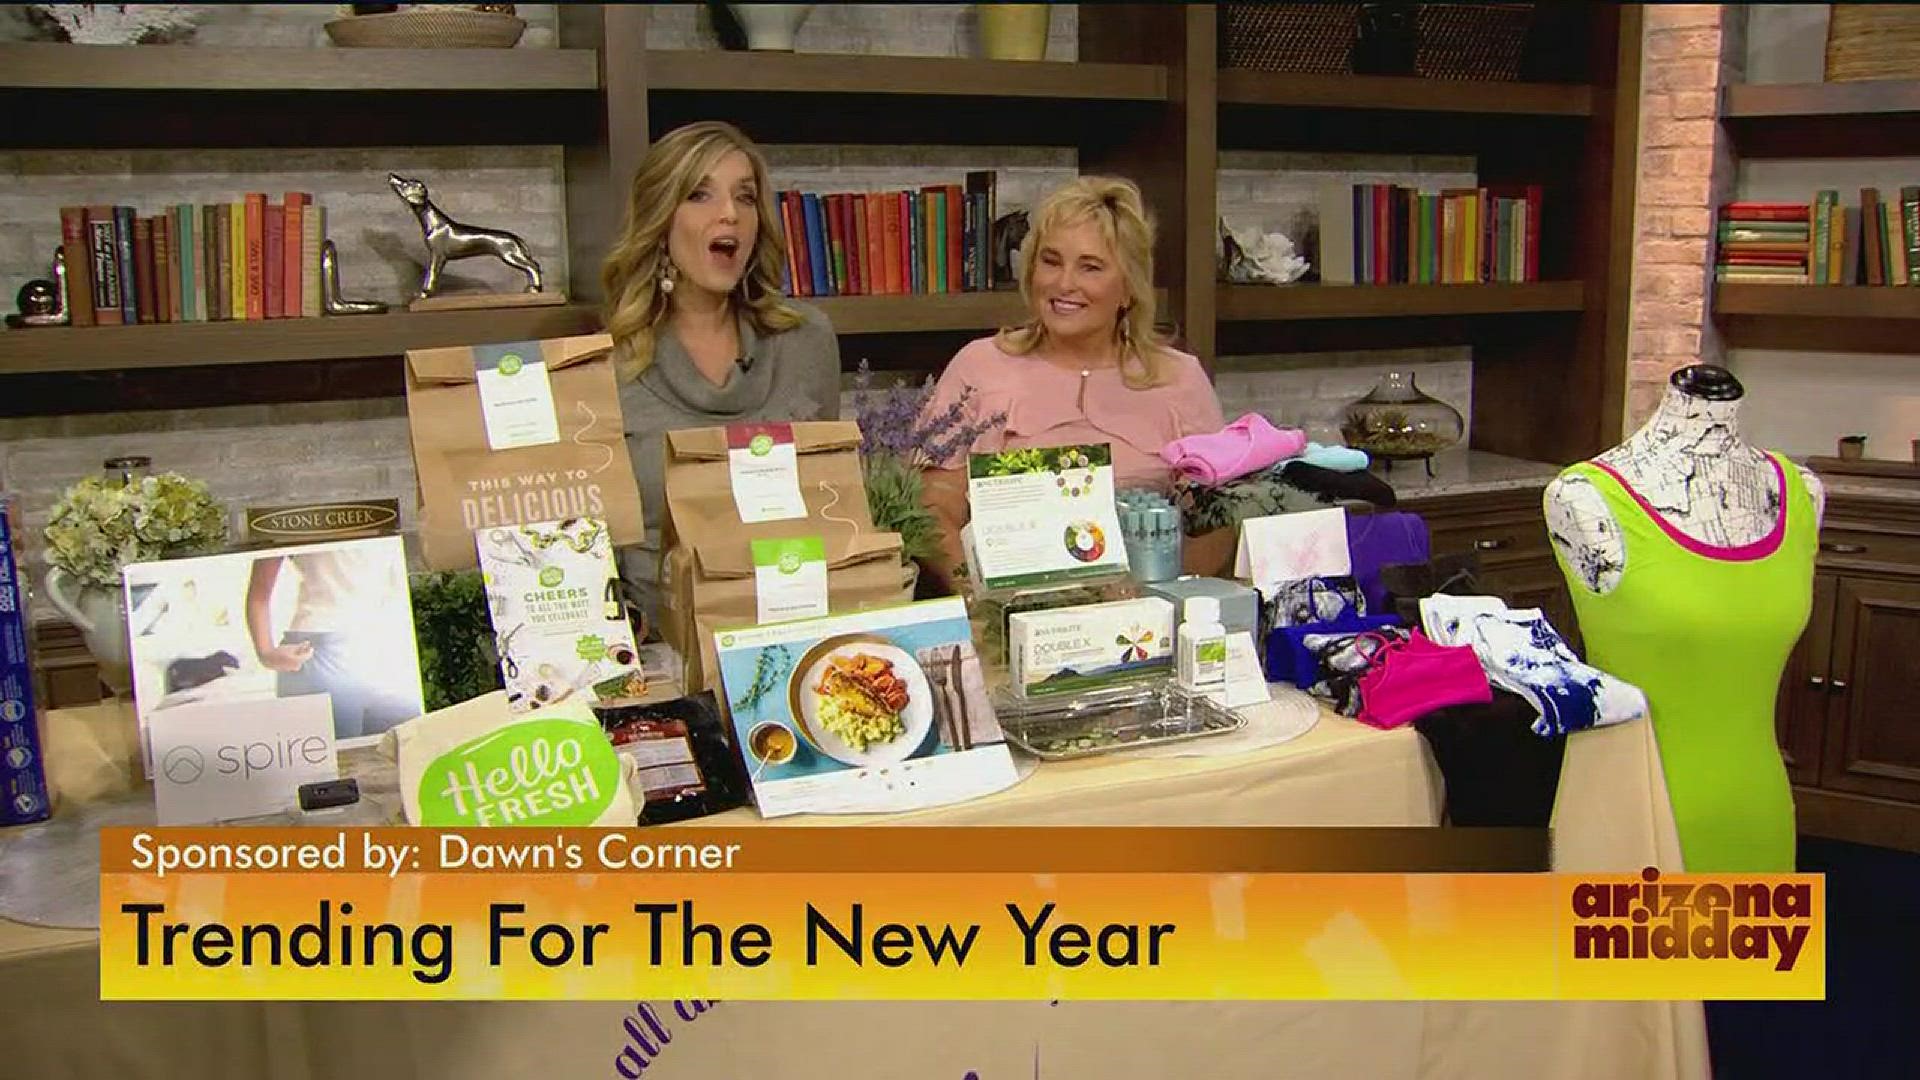 From clothes, to skin, food and more Dawn has us covered on the must haves and what to try in the new year.